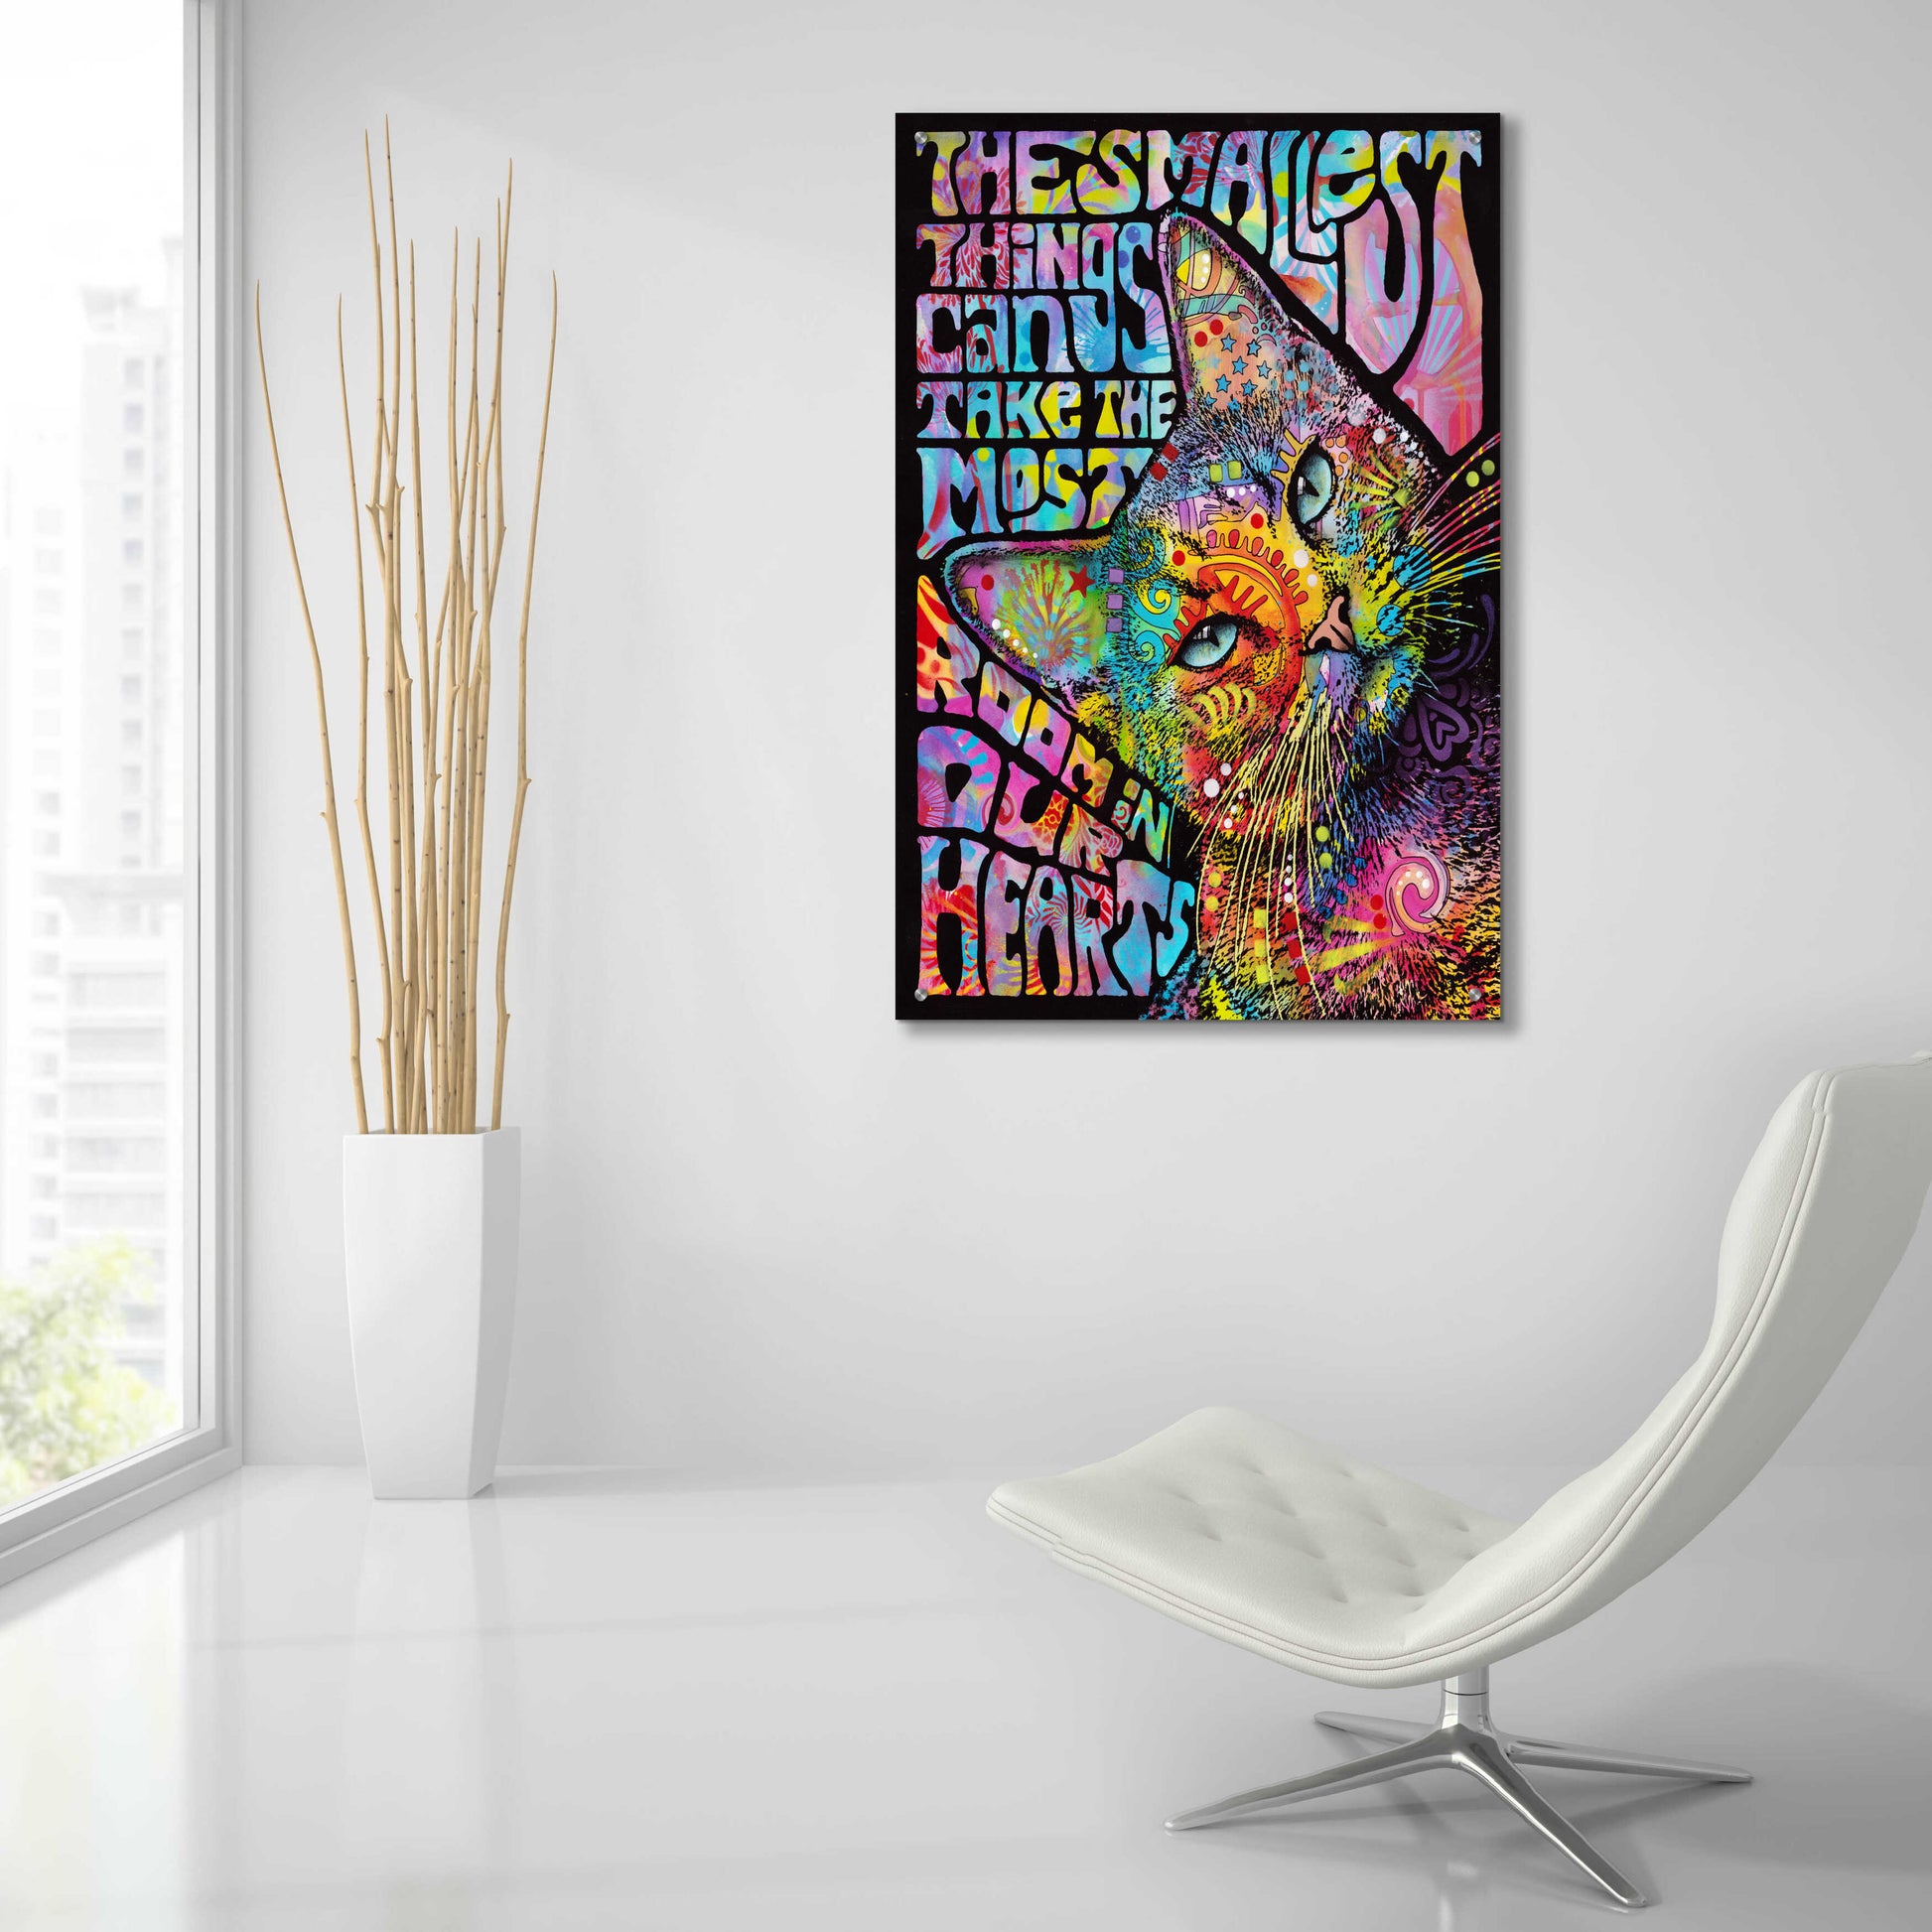 Epic Art 'The Smallest Things' by Dean Russo, Acrylic Glass Wall Art,24x36